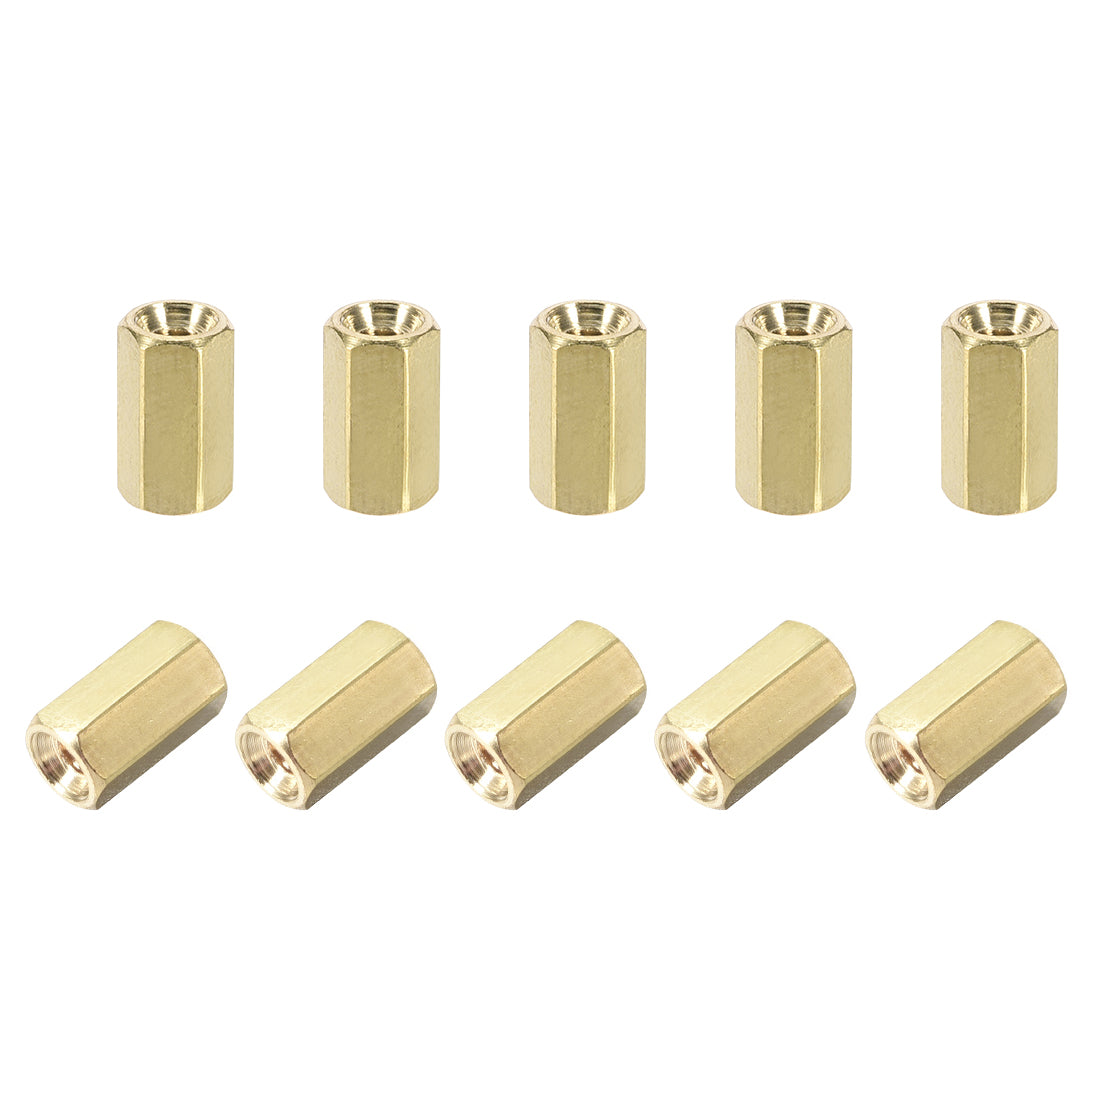 uxcell Uxcell M2.5 M5 Female to Female Hex Brass Spacer Standoff 50pcs